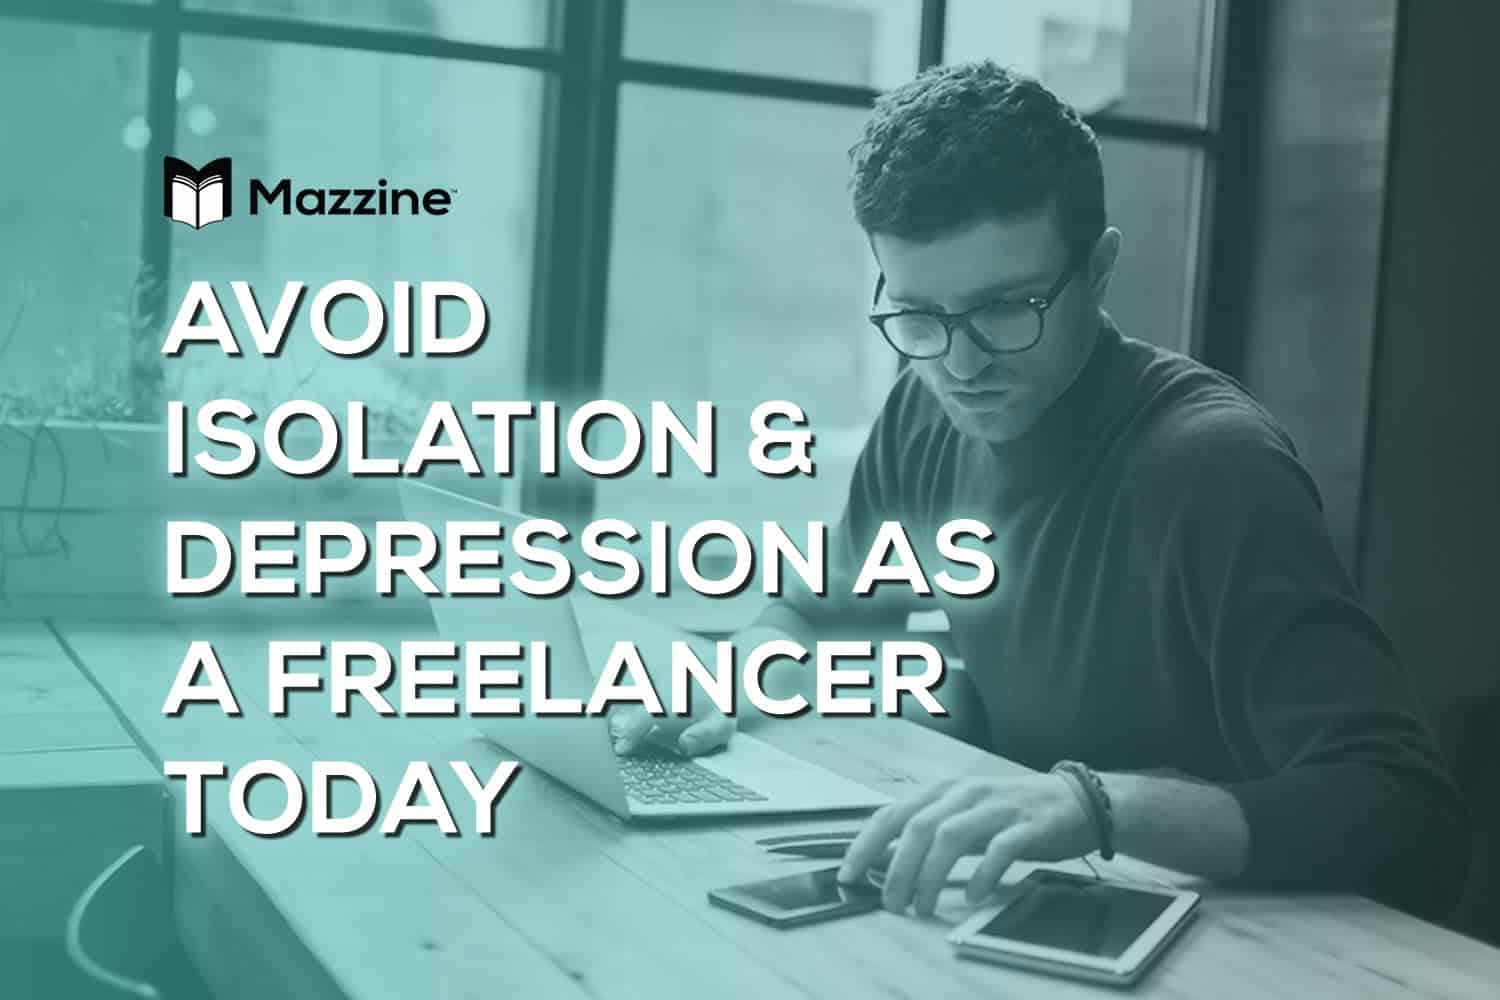 How You Can Start to Avoid Isolation and Depression as a Freelancer Today